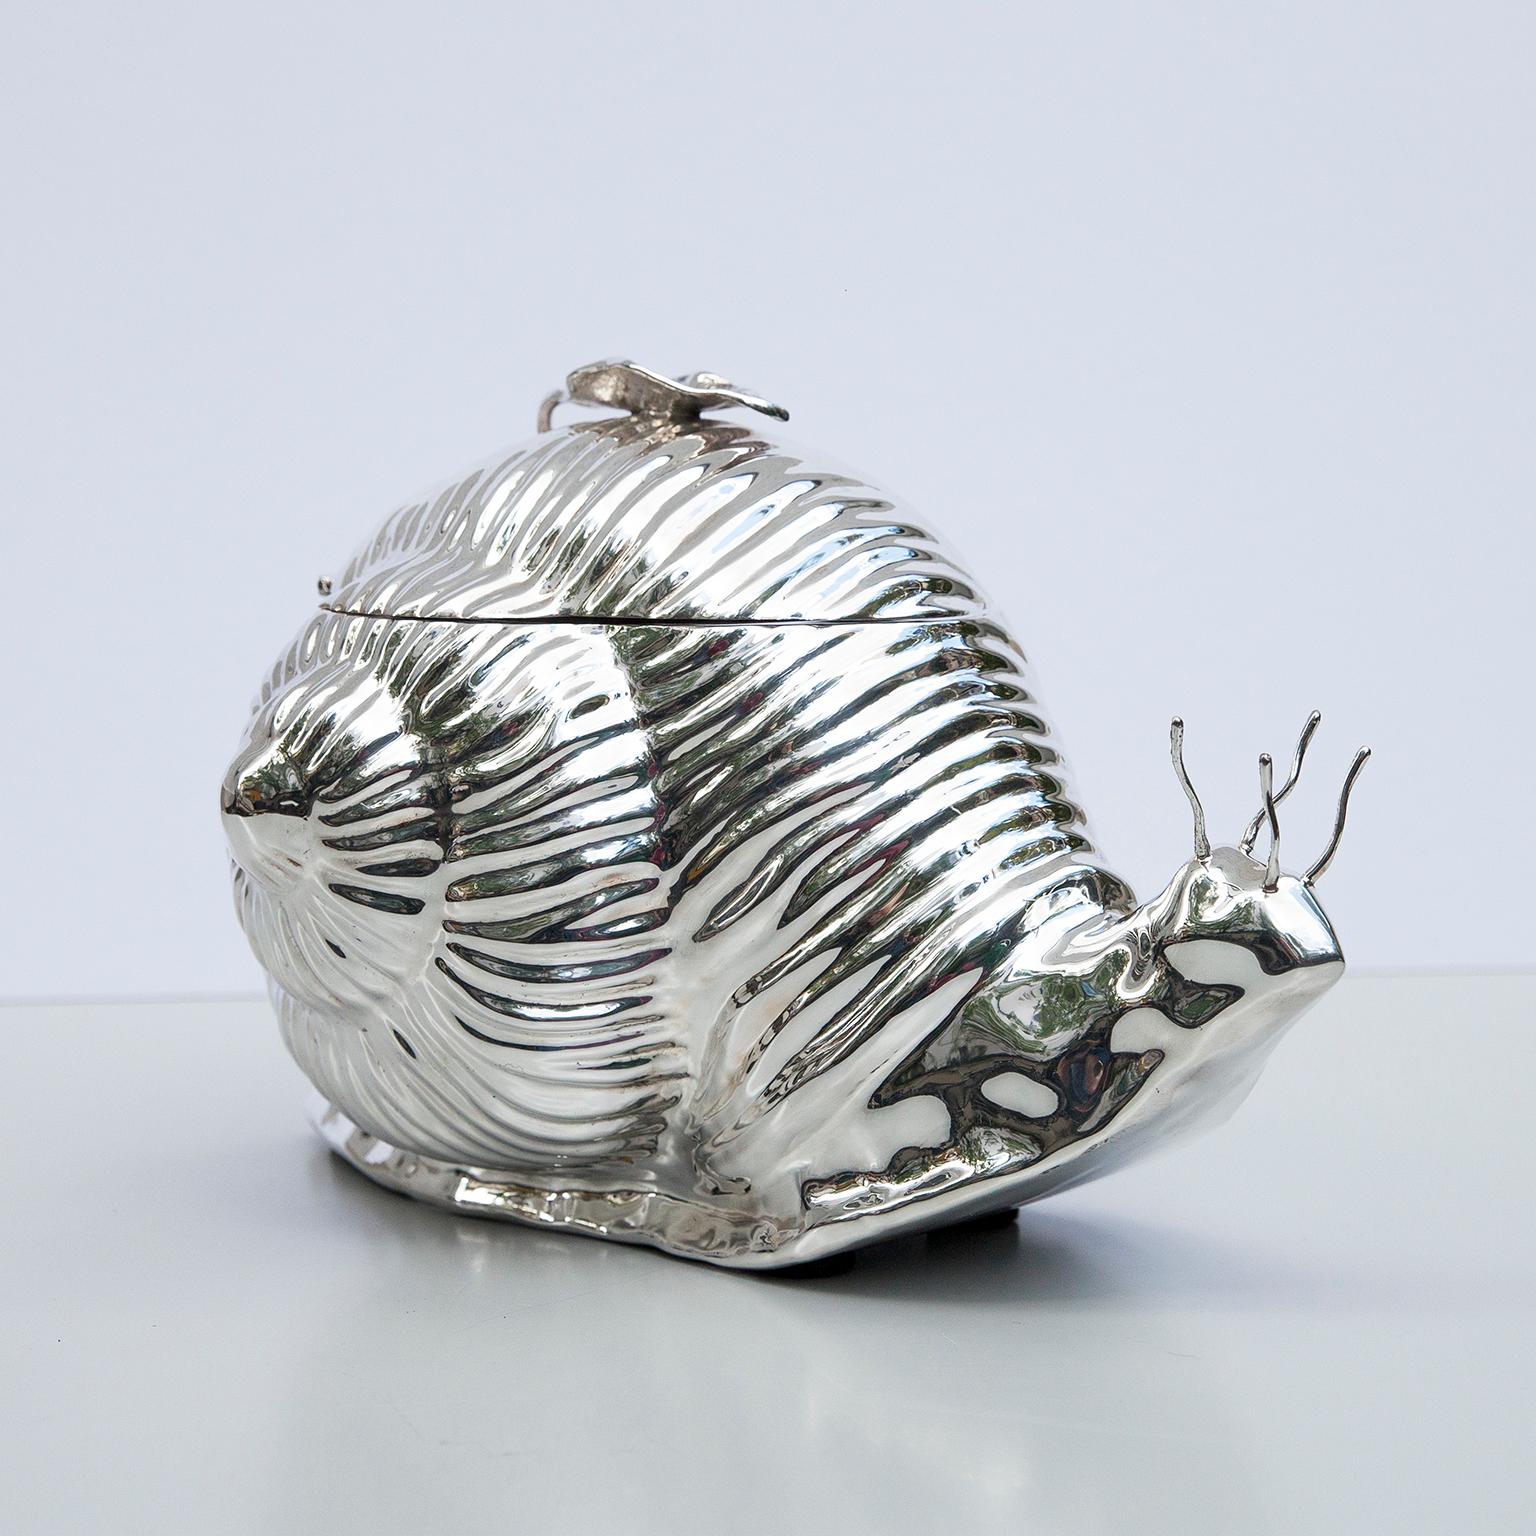 Teghini Firenze snail ice bucket, Italy, silver plated, 1970s with a plastic inlay, in the style of Tony Duquette, featured in a 1977 Architectural Digest article, stamped 